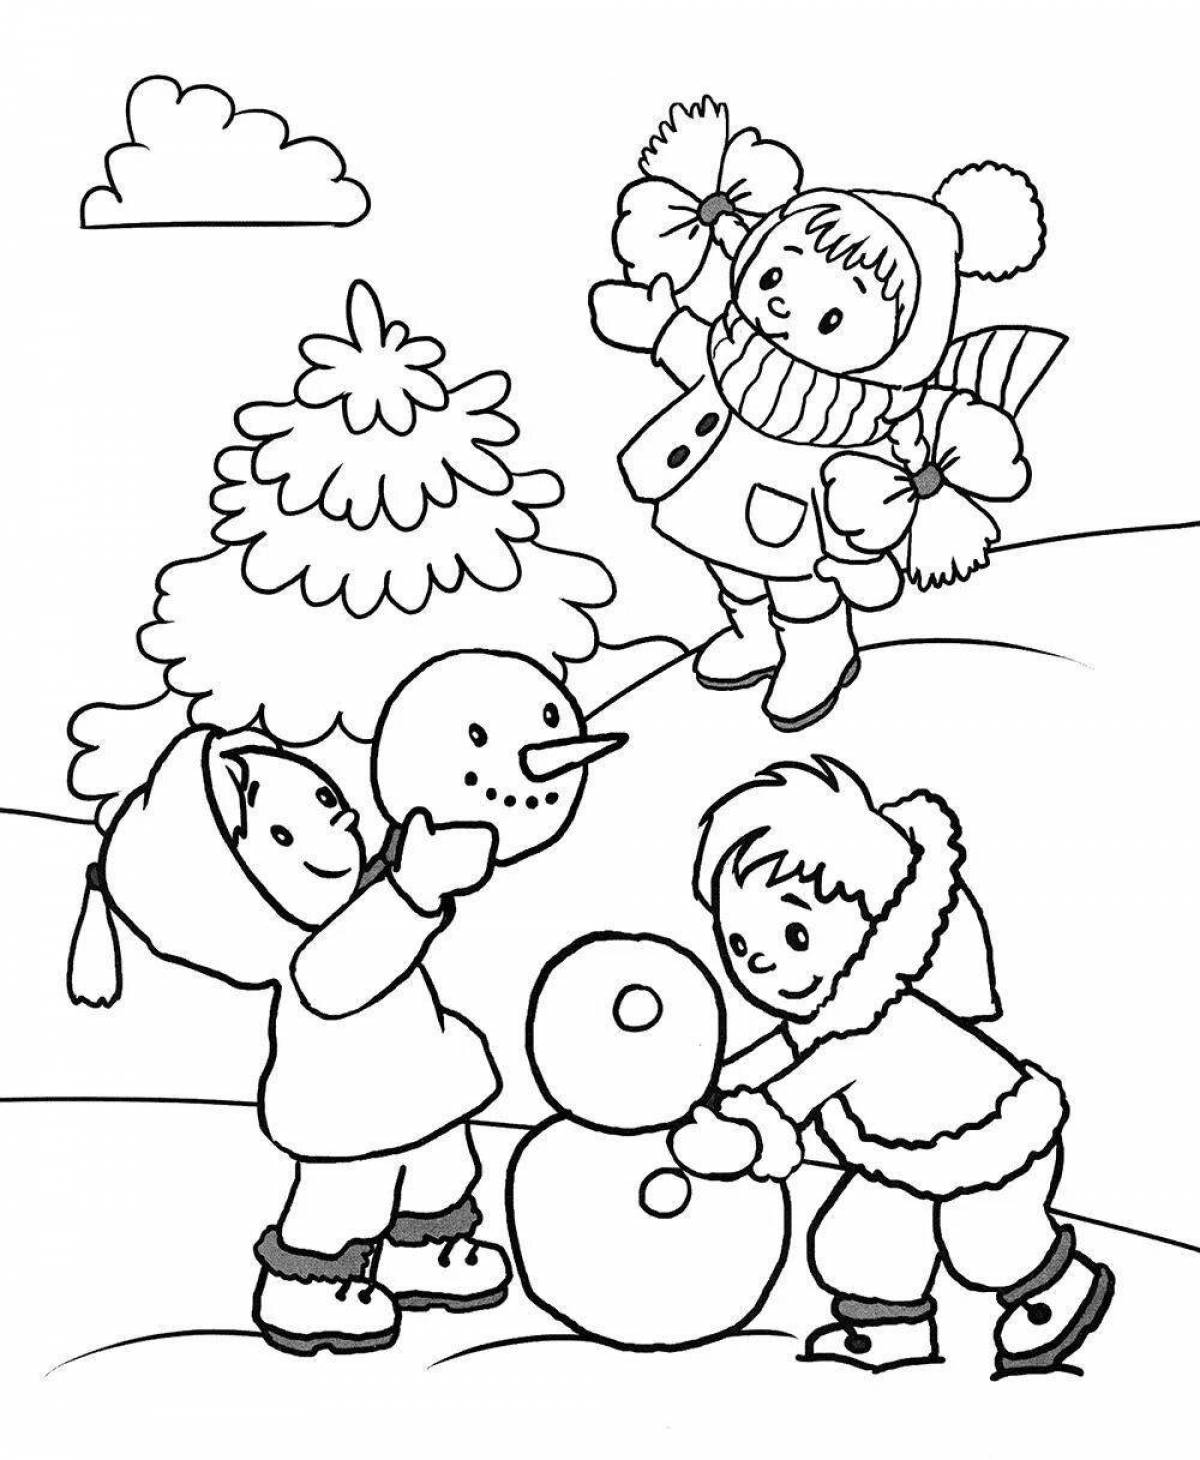 Exotic Christmas funny coloring book